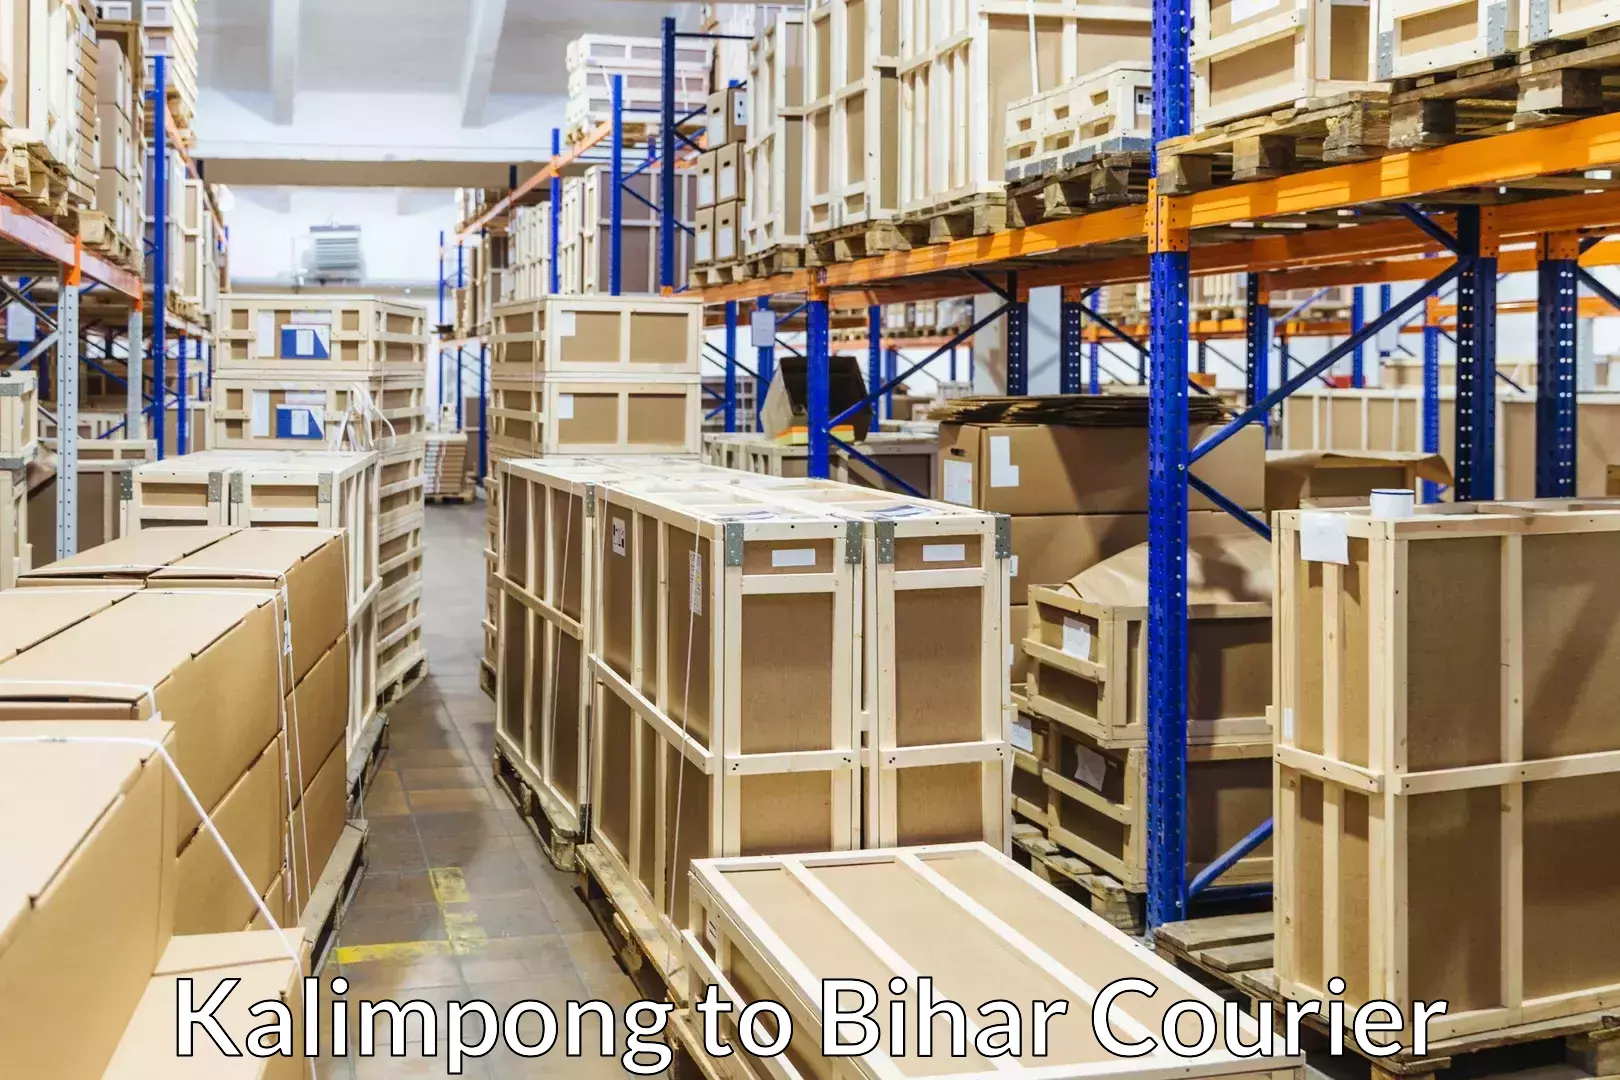 Cost-effective moving options Kalimpong to Mahnar Bazar